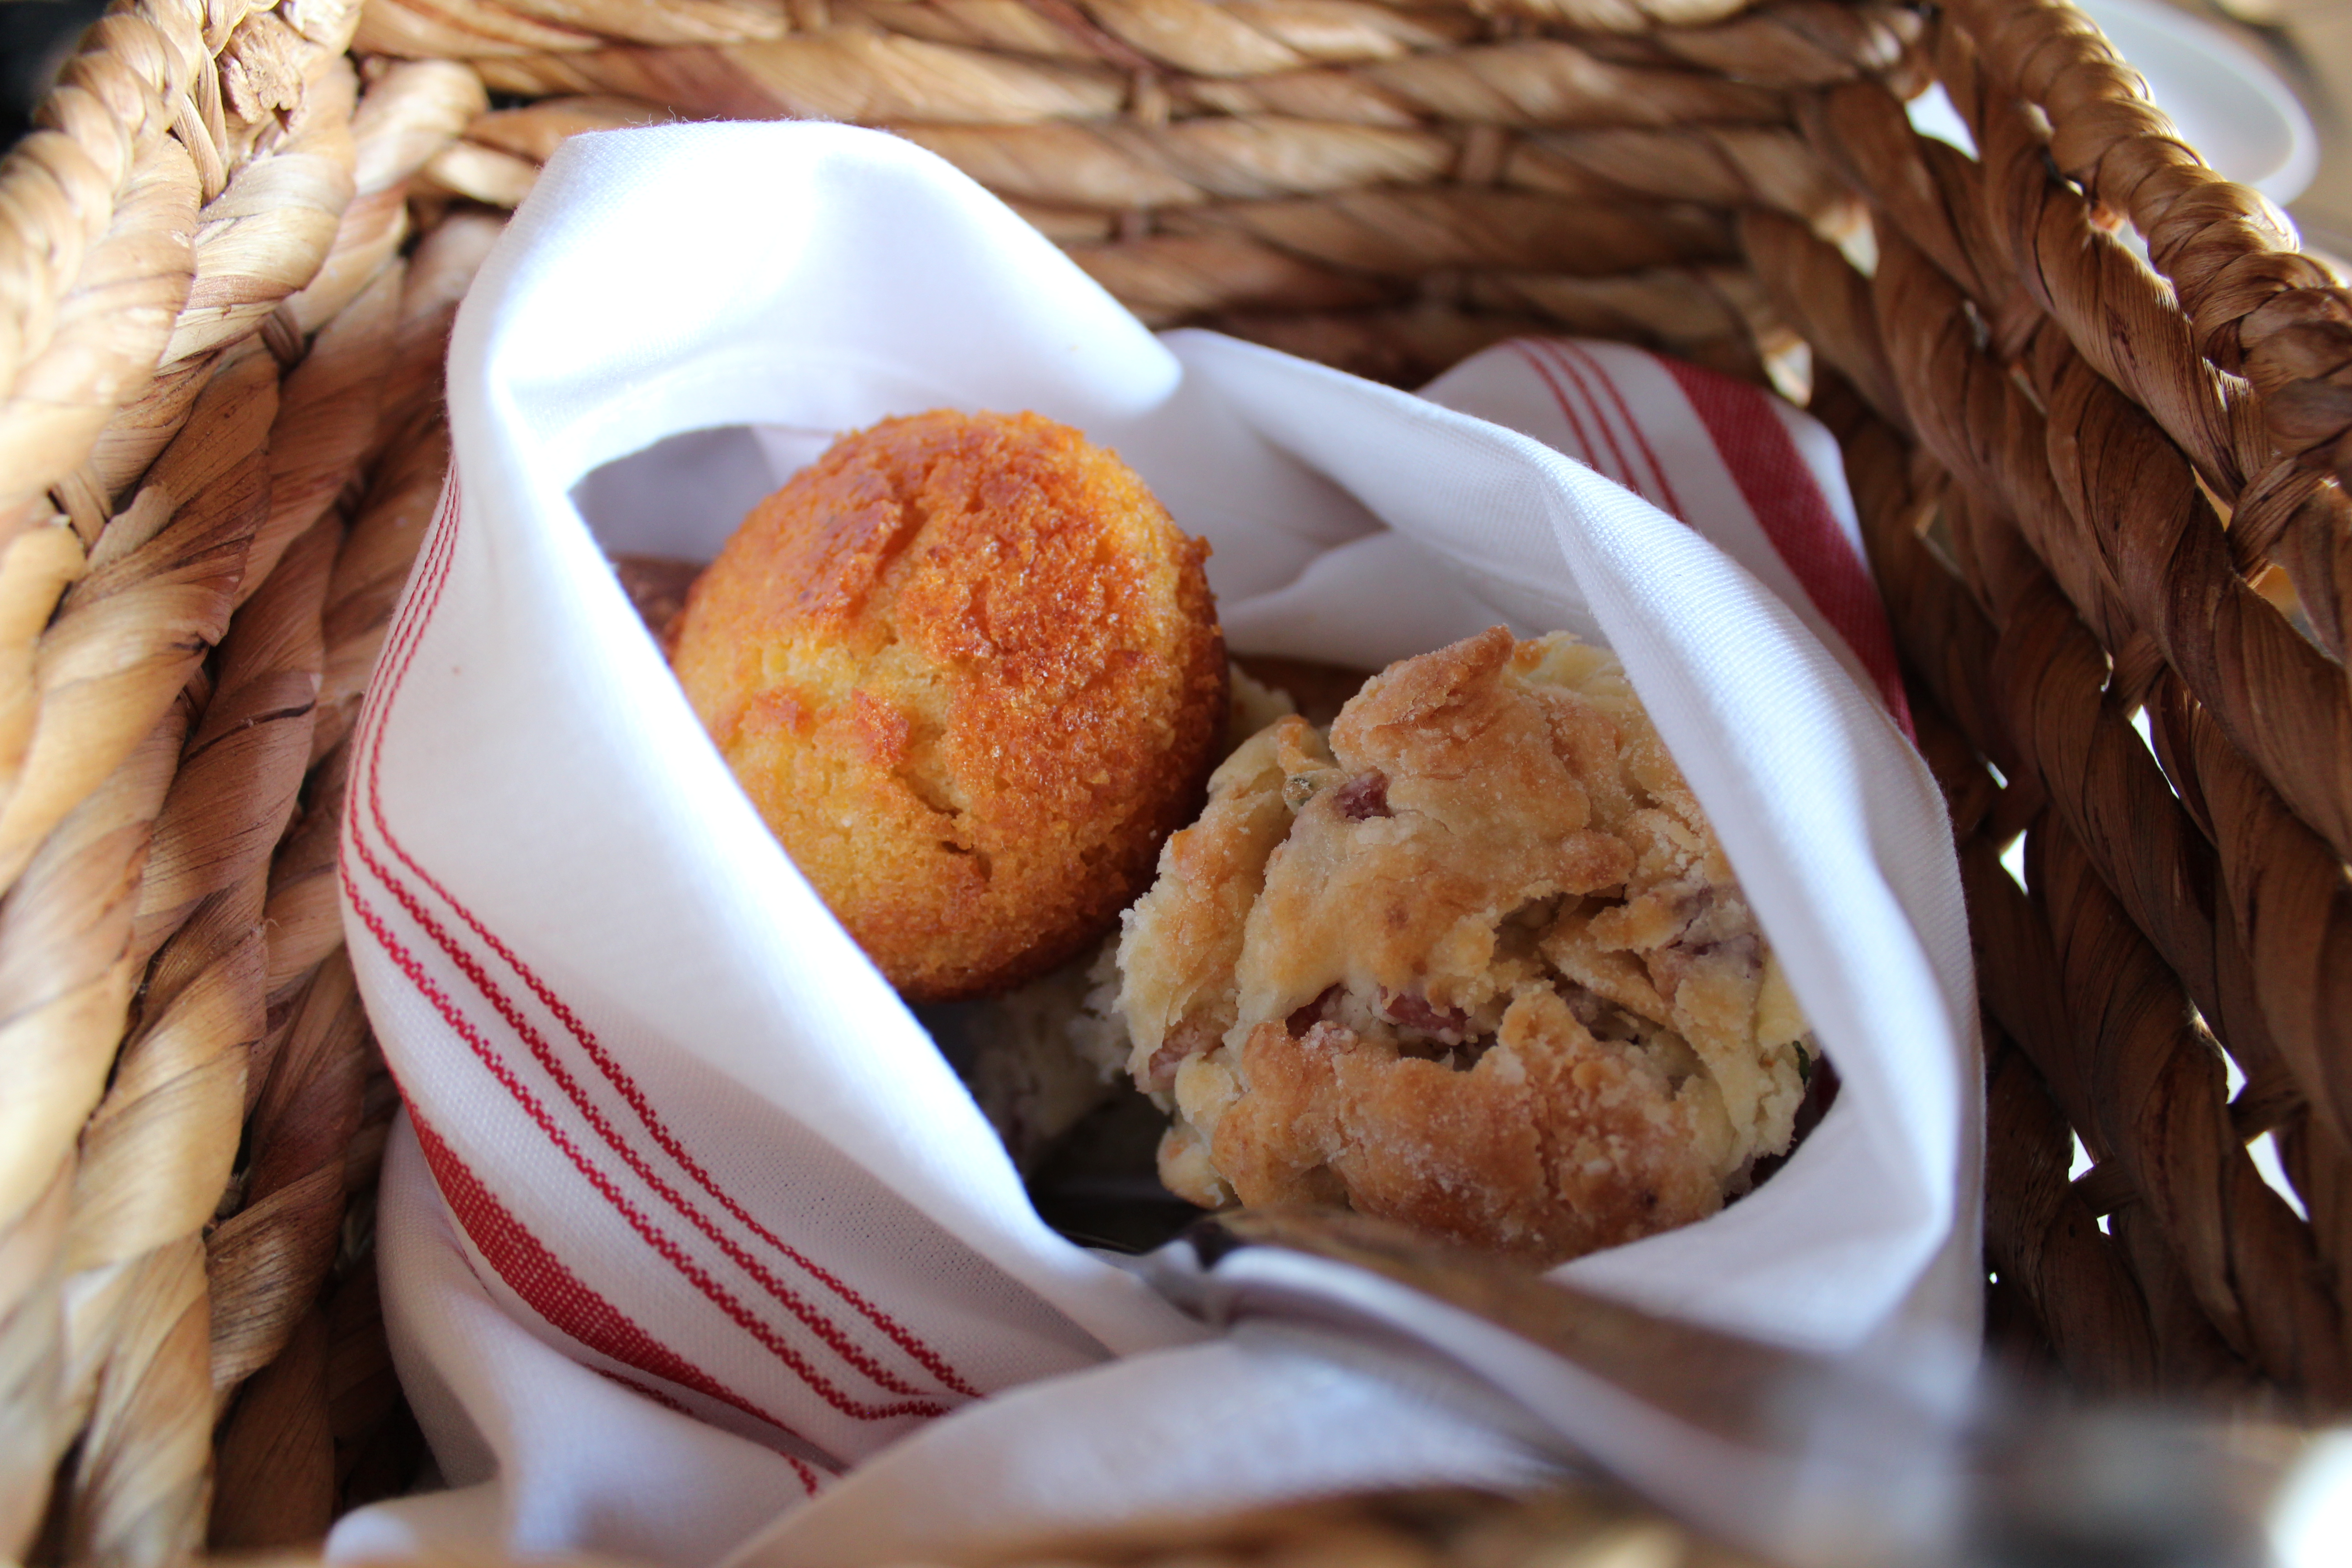 Enliven meals on cold days with fresh muffins hot from the oven